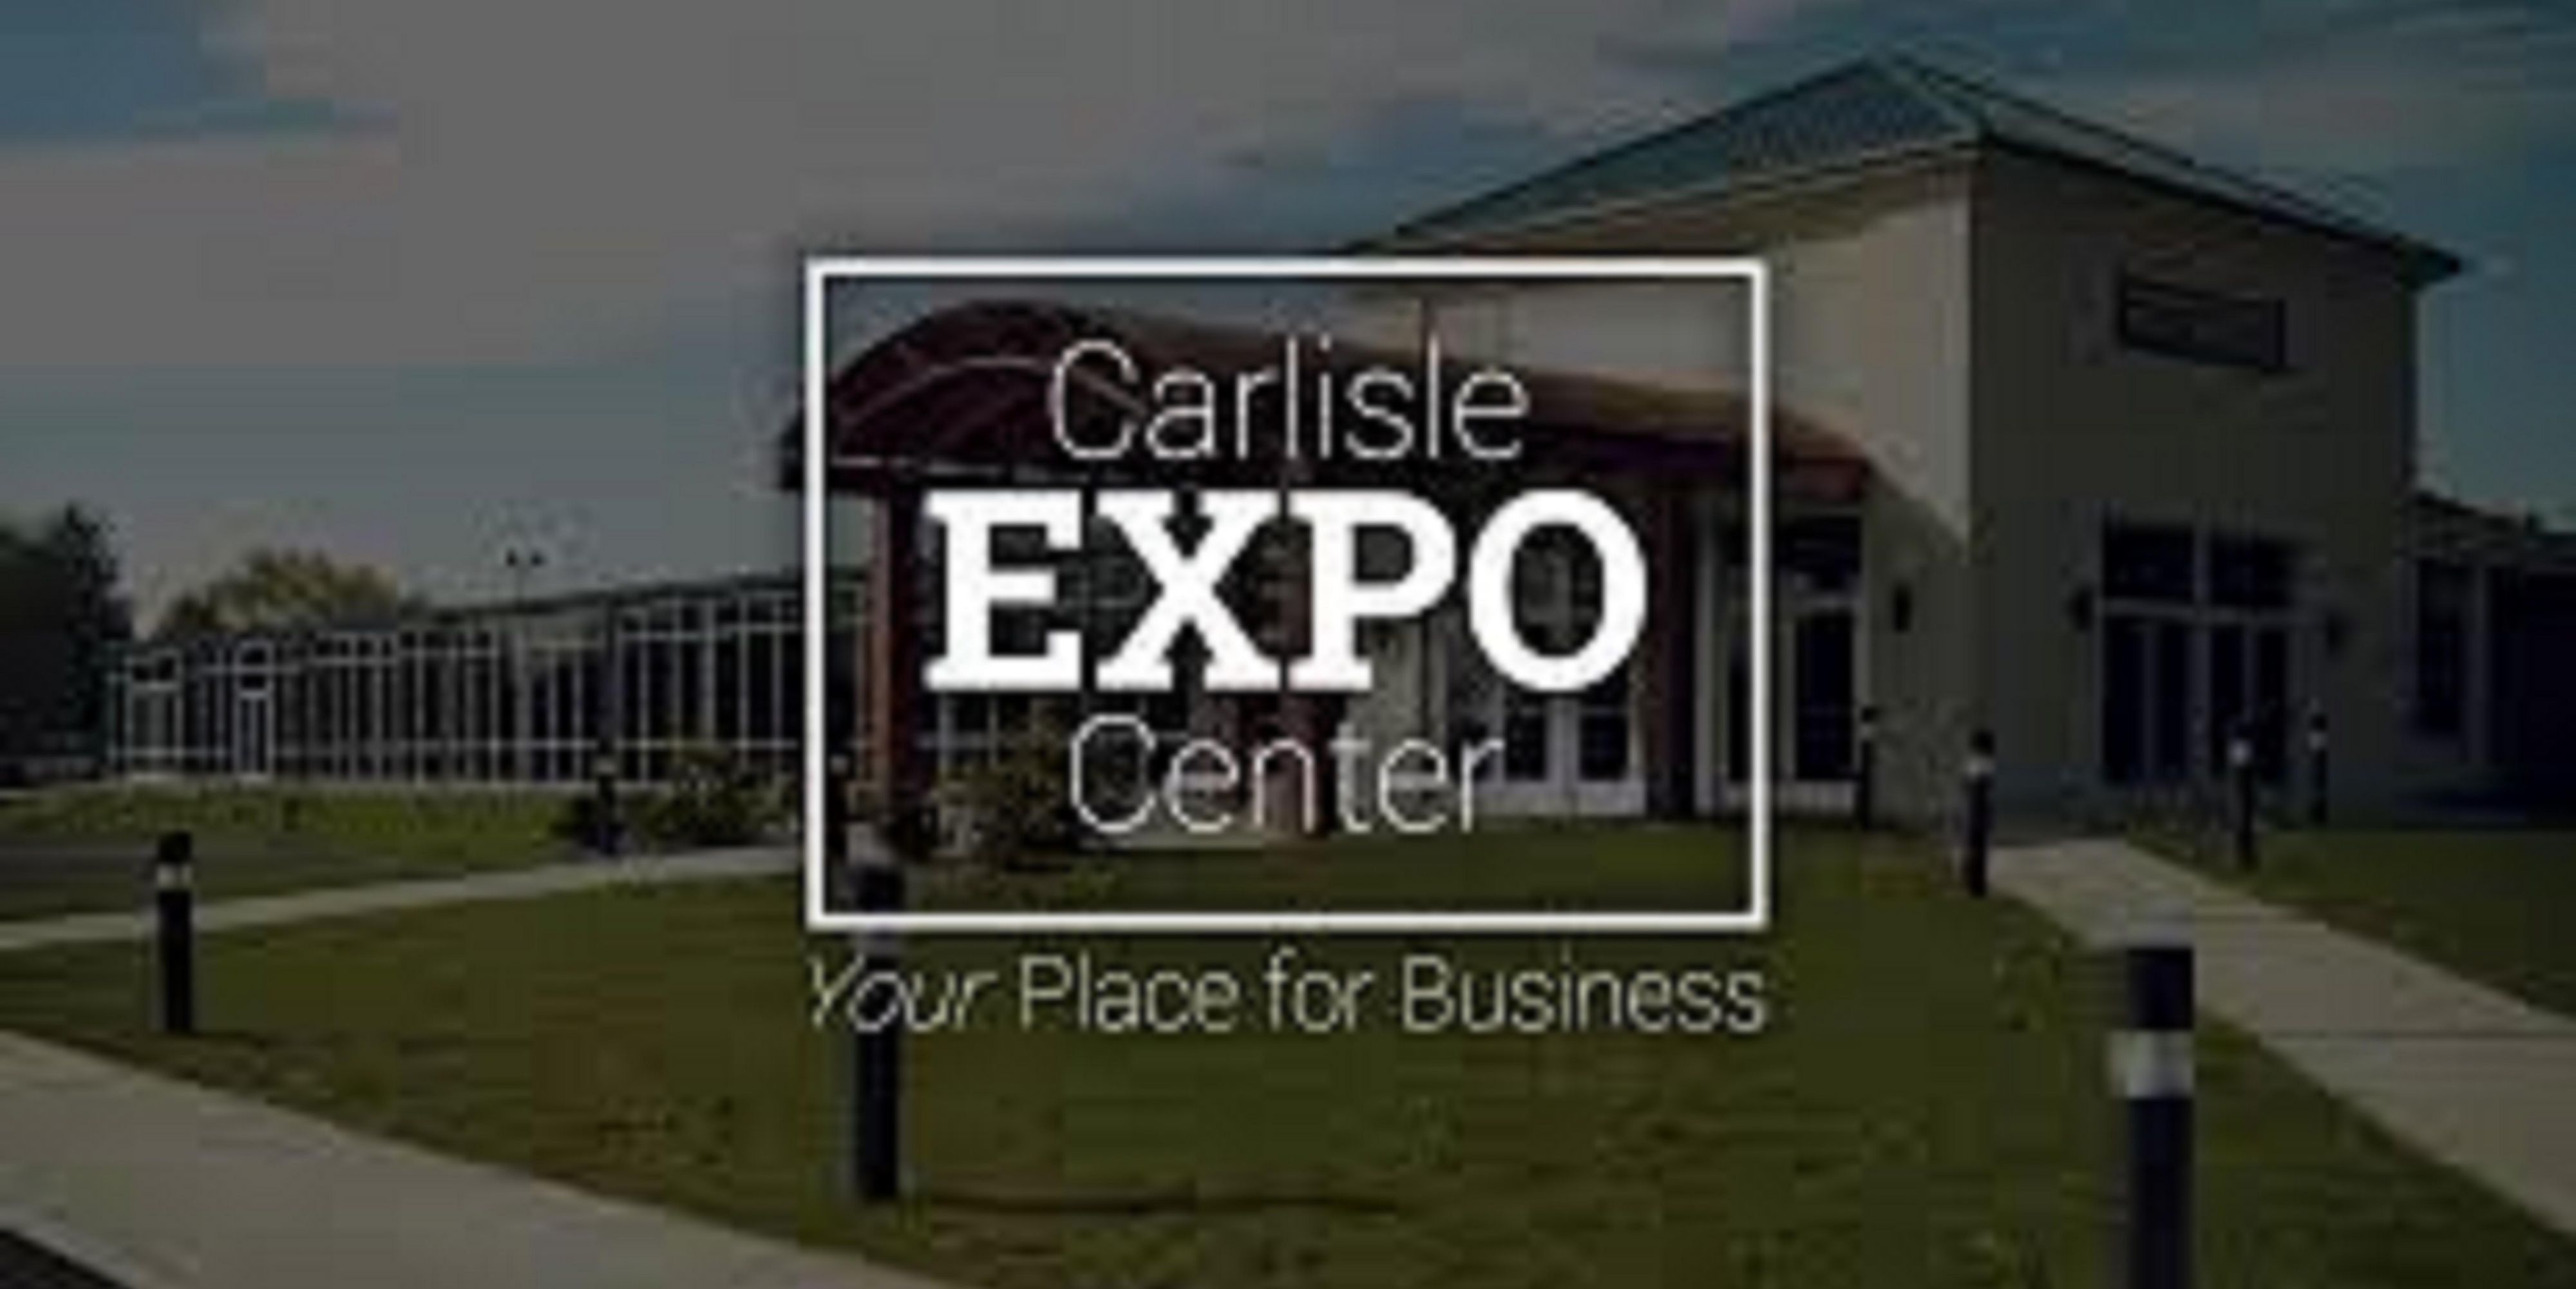 Our location is easy on/off access from I-81 and the Carlisle Expo Center.  Under 5 miles and a quick 10 minutes, make our hotel your place to stay when attending one of the many events going on at the Carlisle Expo Center.  Contact hotel for our best available rates.  As always, breakfast is included in all our rates.